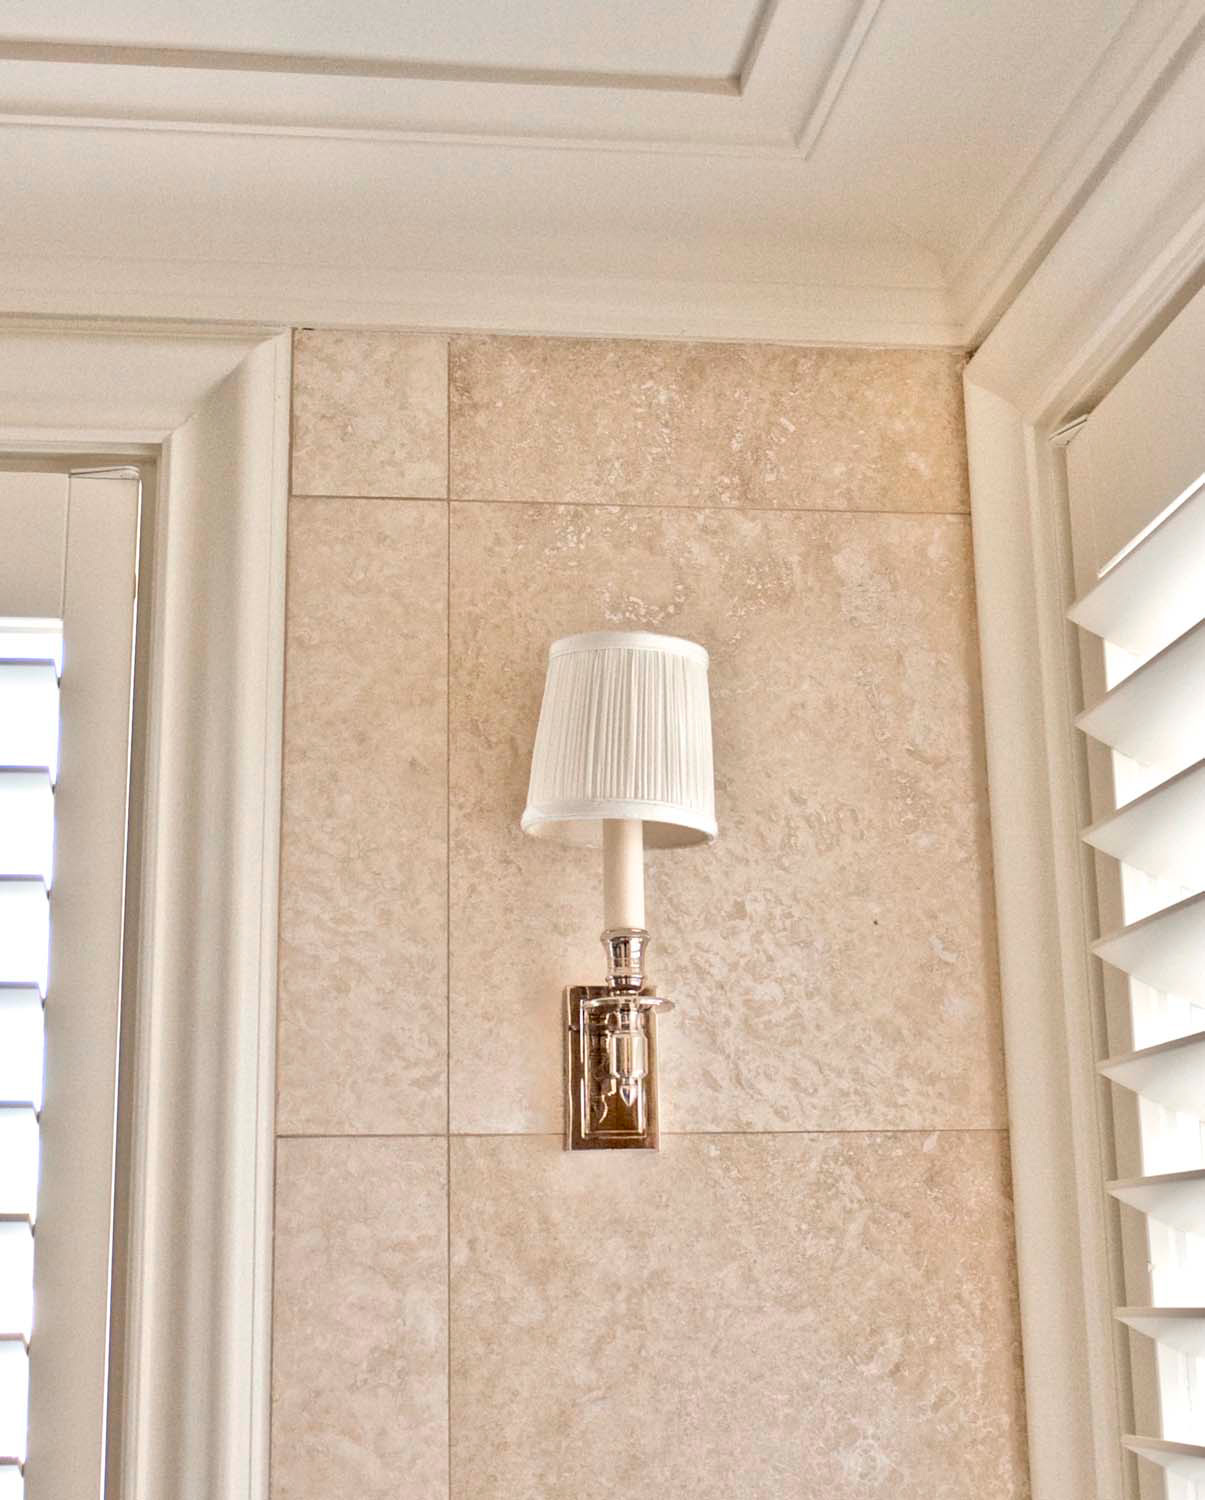 3 Traditional style wall light design in french stye bathroom with formal features